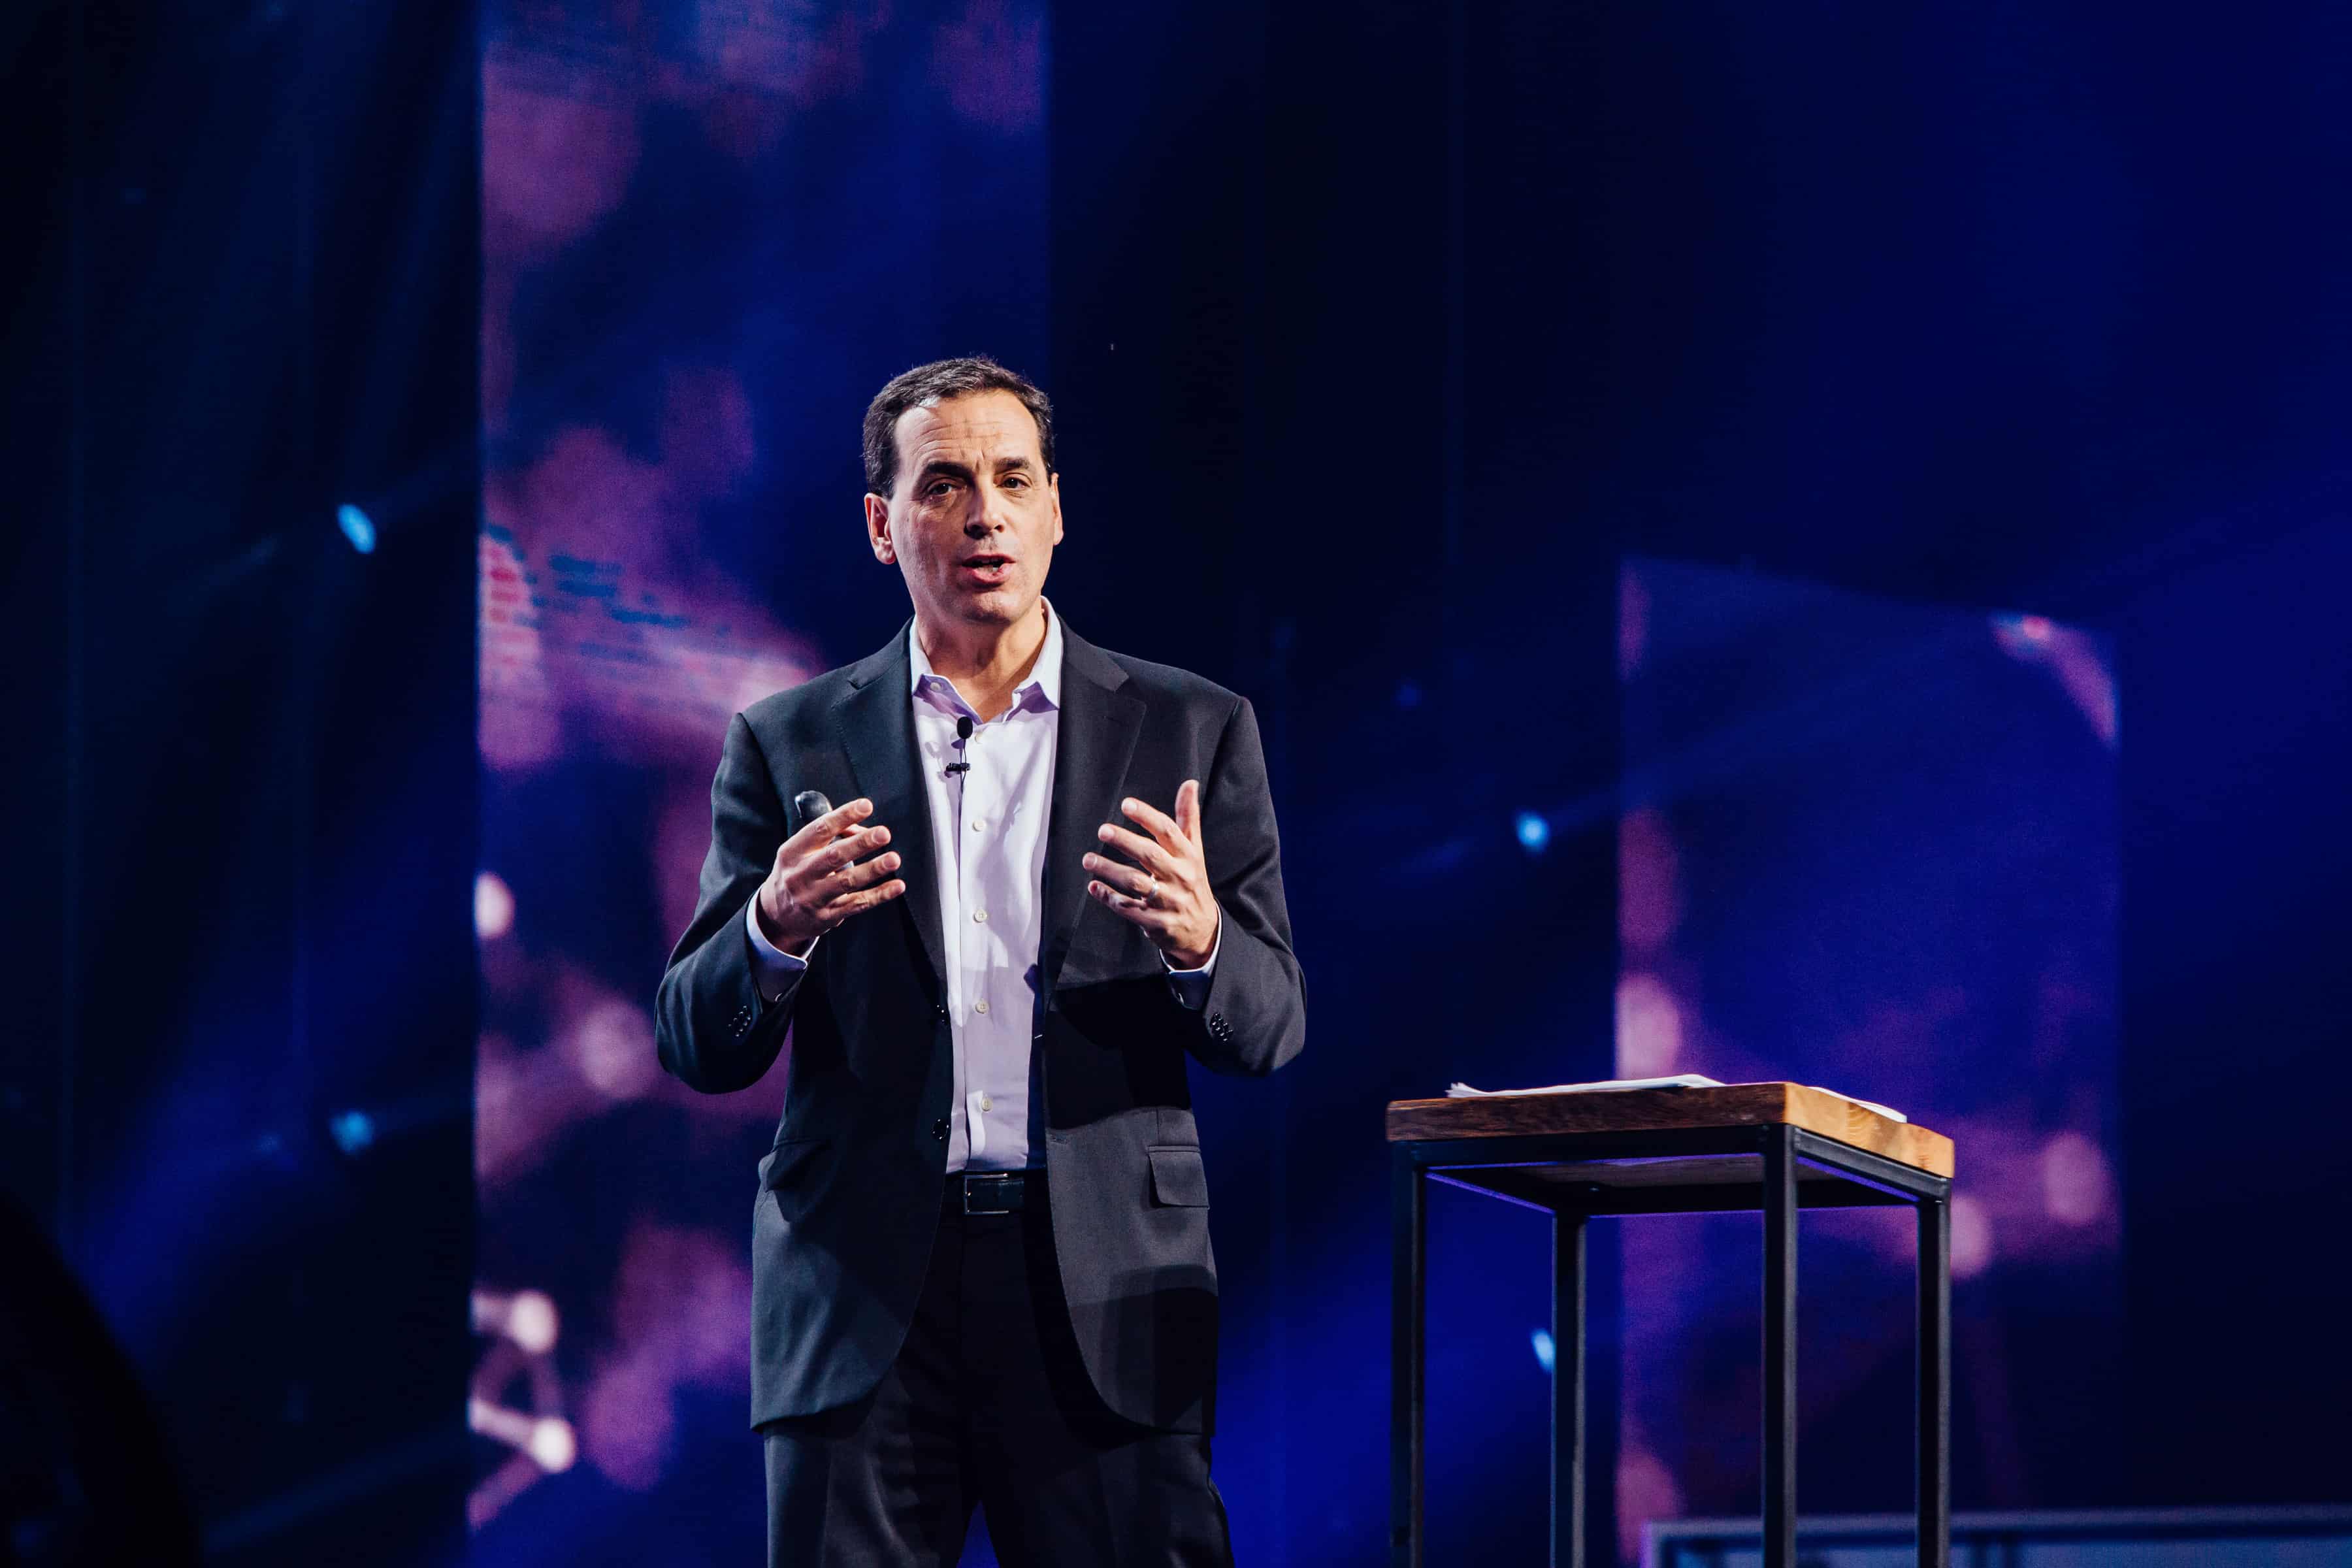 Leadership lessons from Daniel Pink